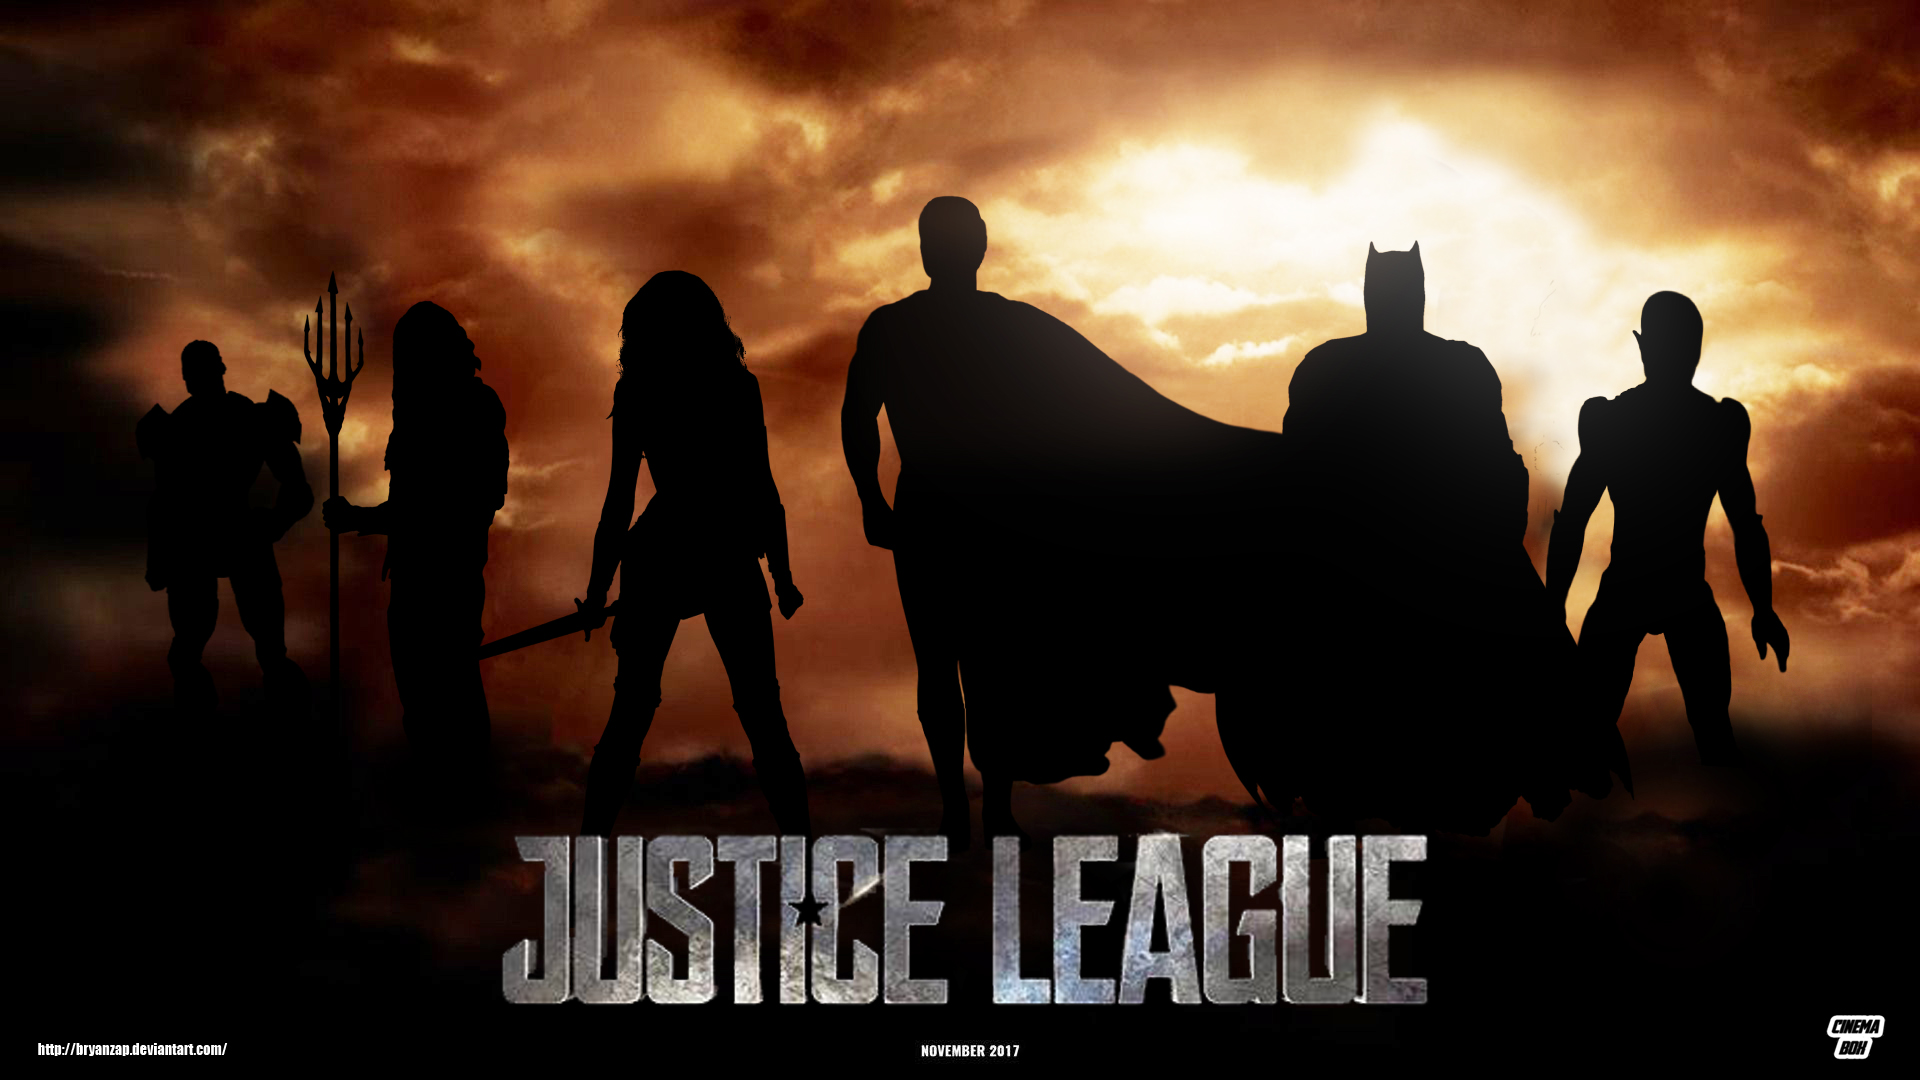 170+ Justice League HD Wallpapers and Backgrounds